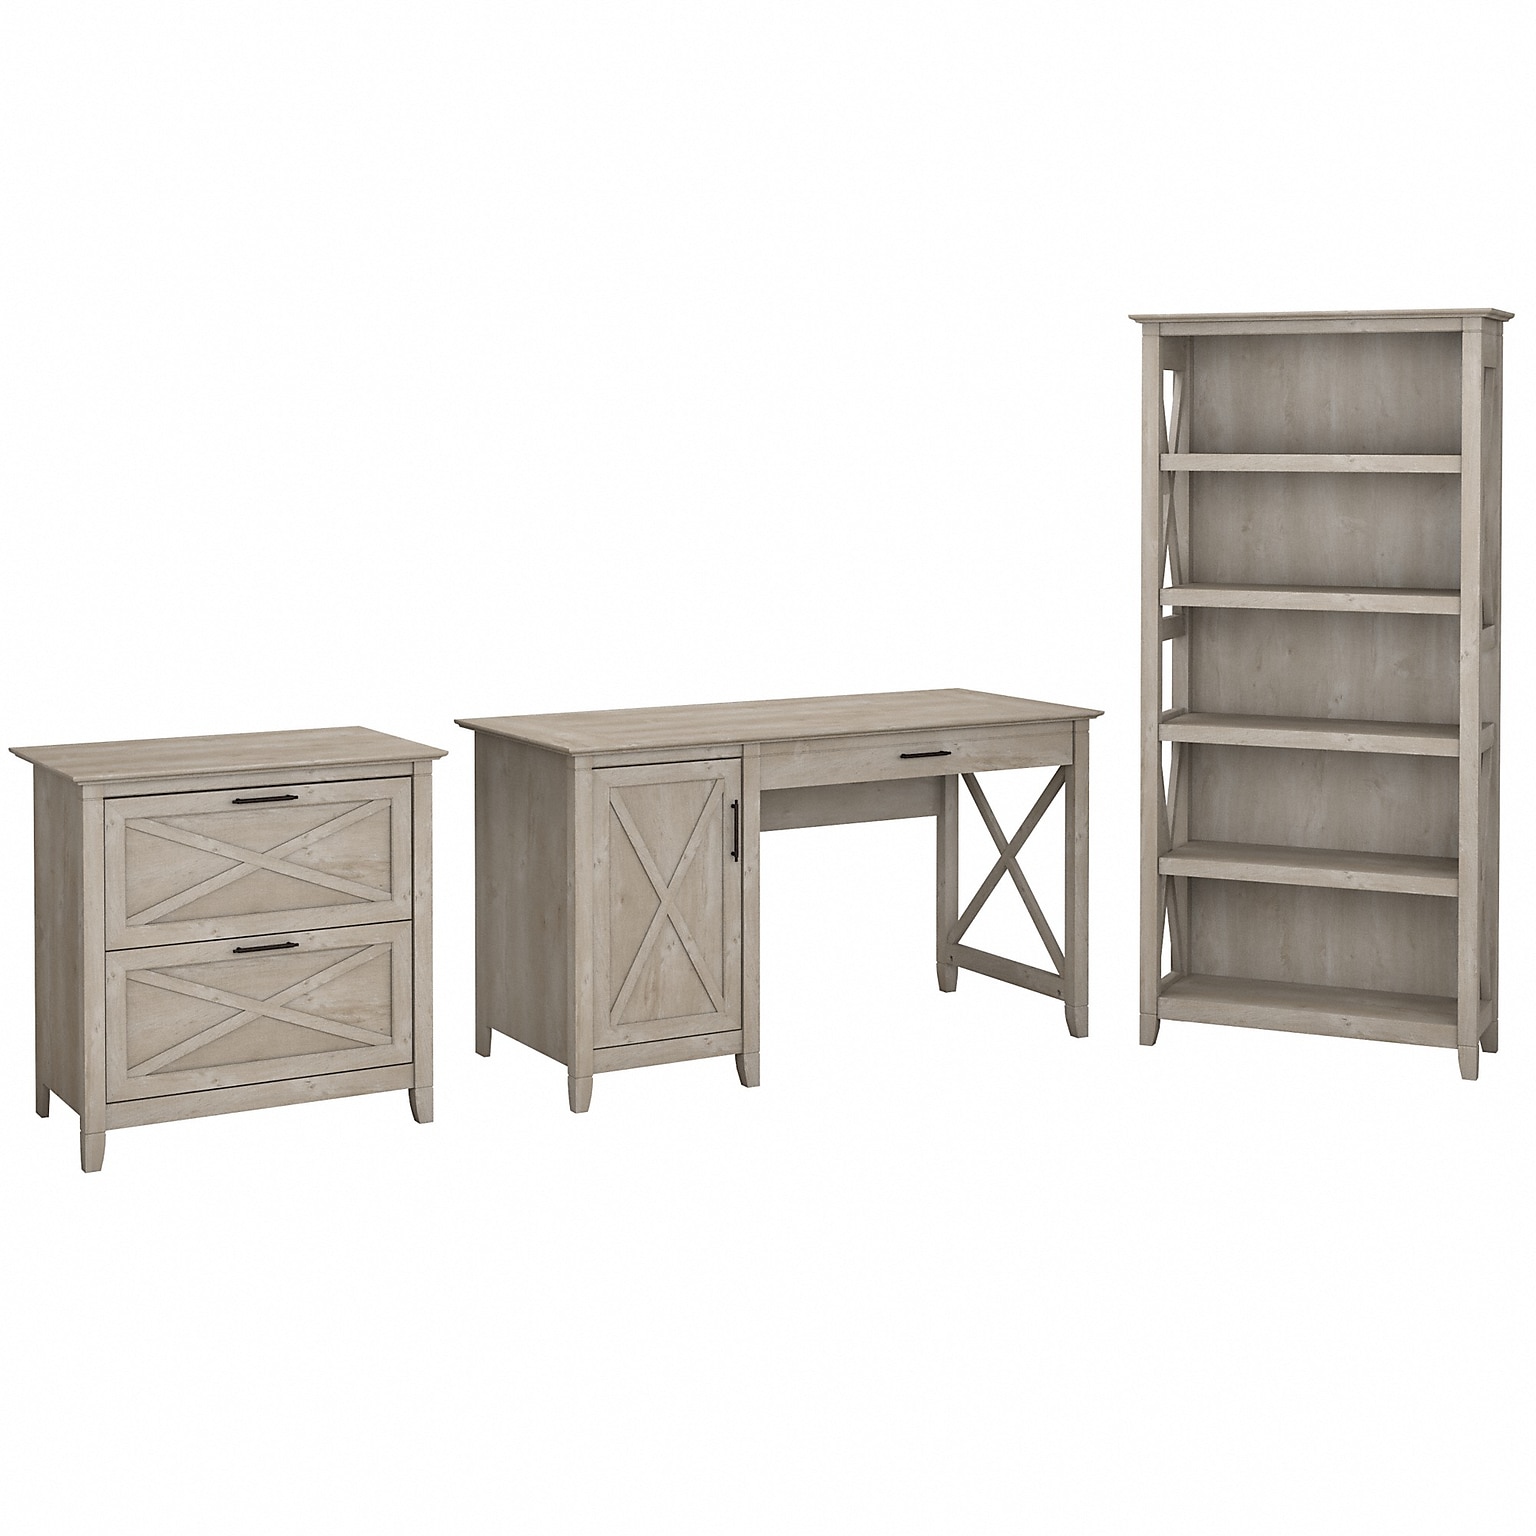 Bush Furniture Key West 54W Single Pedestal Desk with Lateral File and 5 Shelf Bookcase, Washed Gray (KWS009WG)